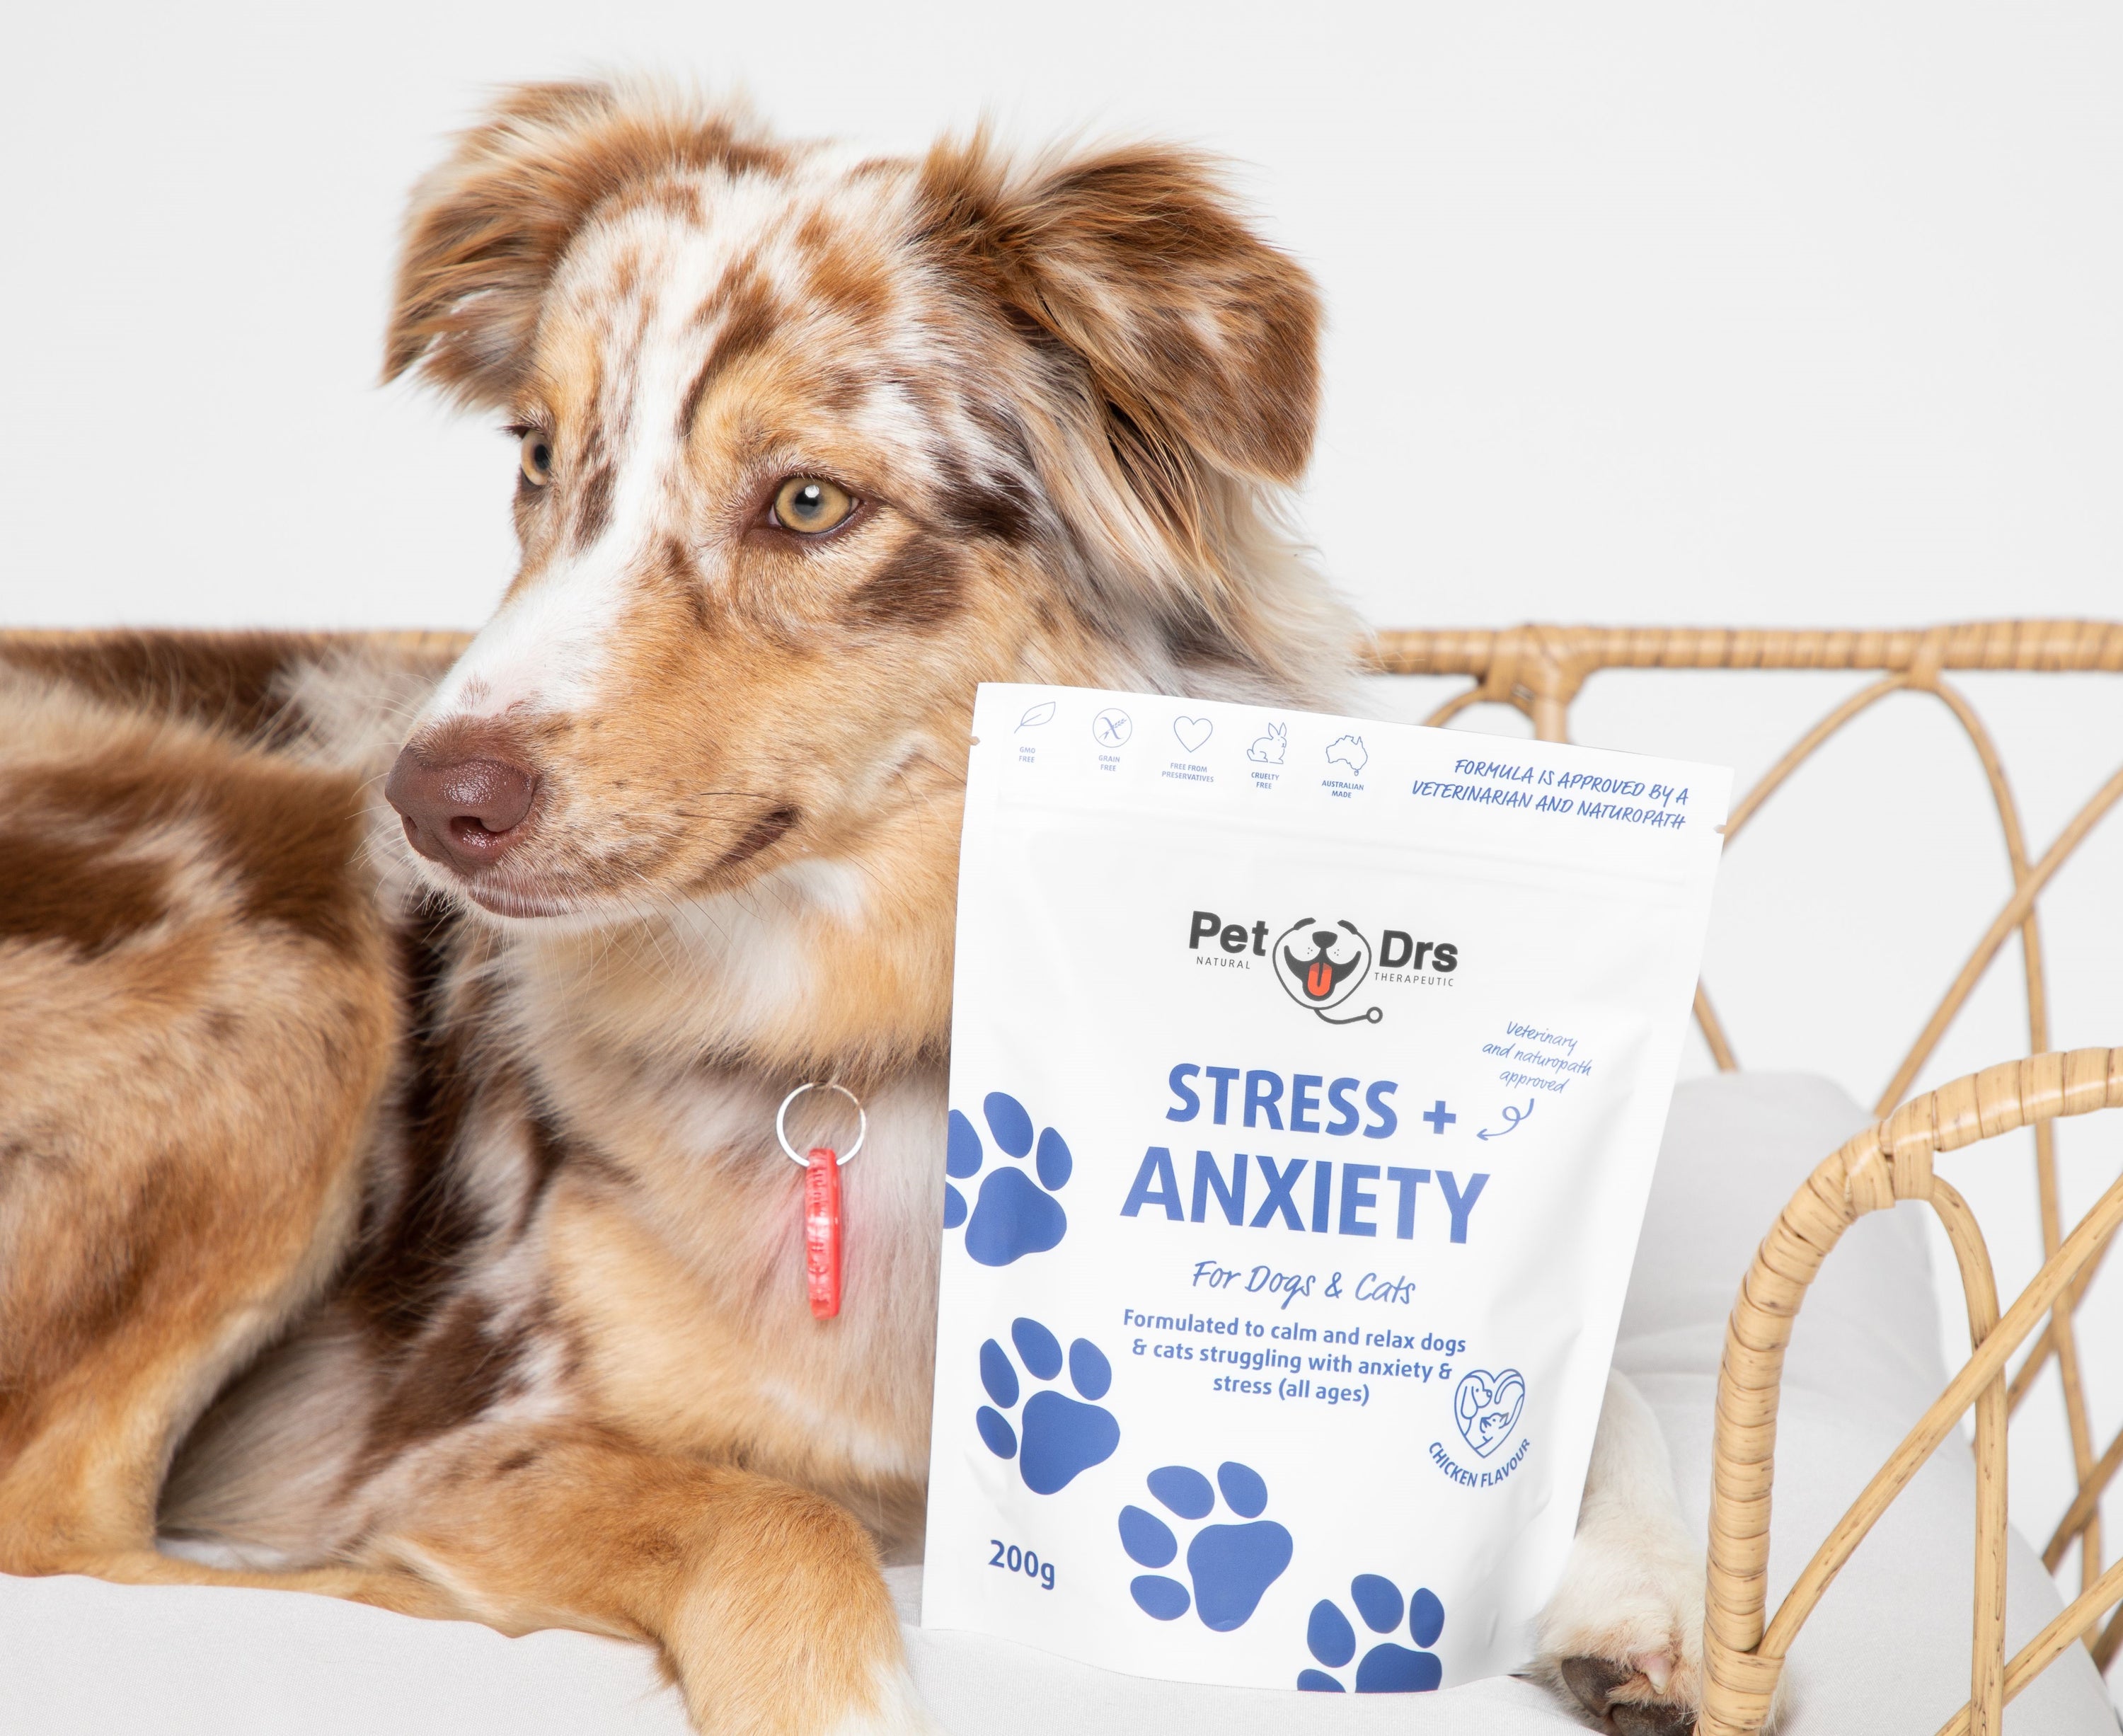 Dog Stress & Anxiety: What Dog Owners Need To Know!